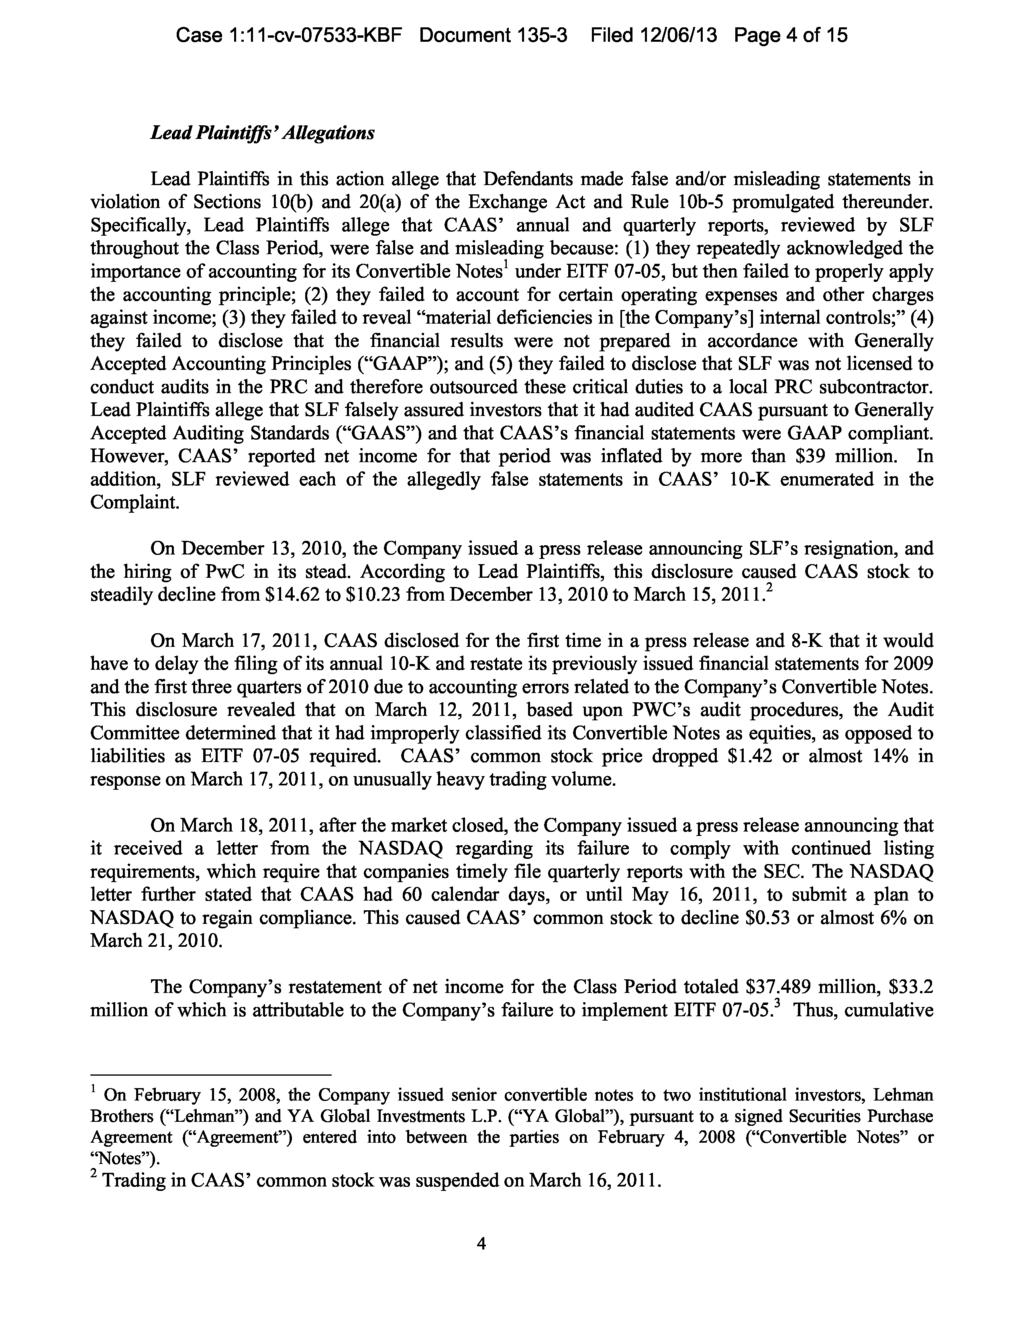 Case 1:11-cv-07533-KBF Document 135-3 Filed 12/06/13 Page 4 of 15 Lead Plaintiffs Allegations Lead Plaintiffs in this action allege that Defendants made false and/or misleading statements in